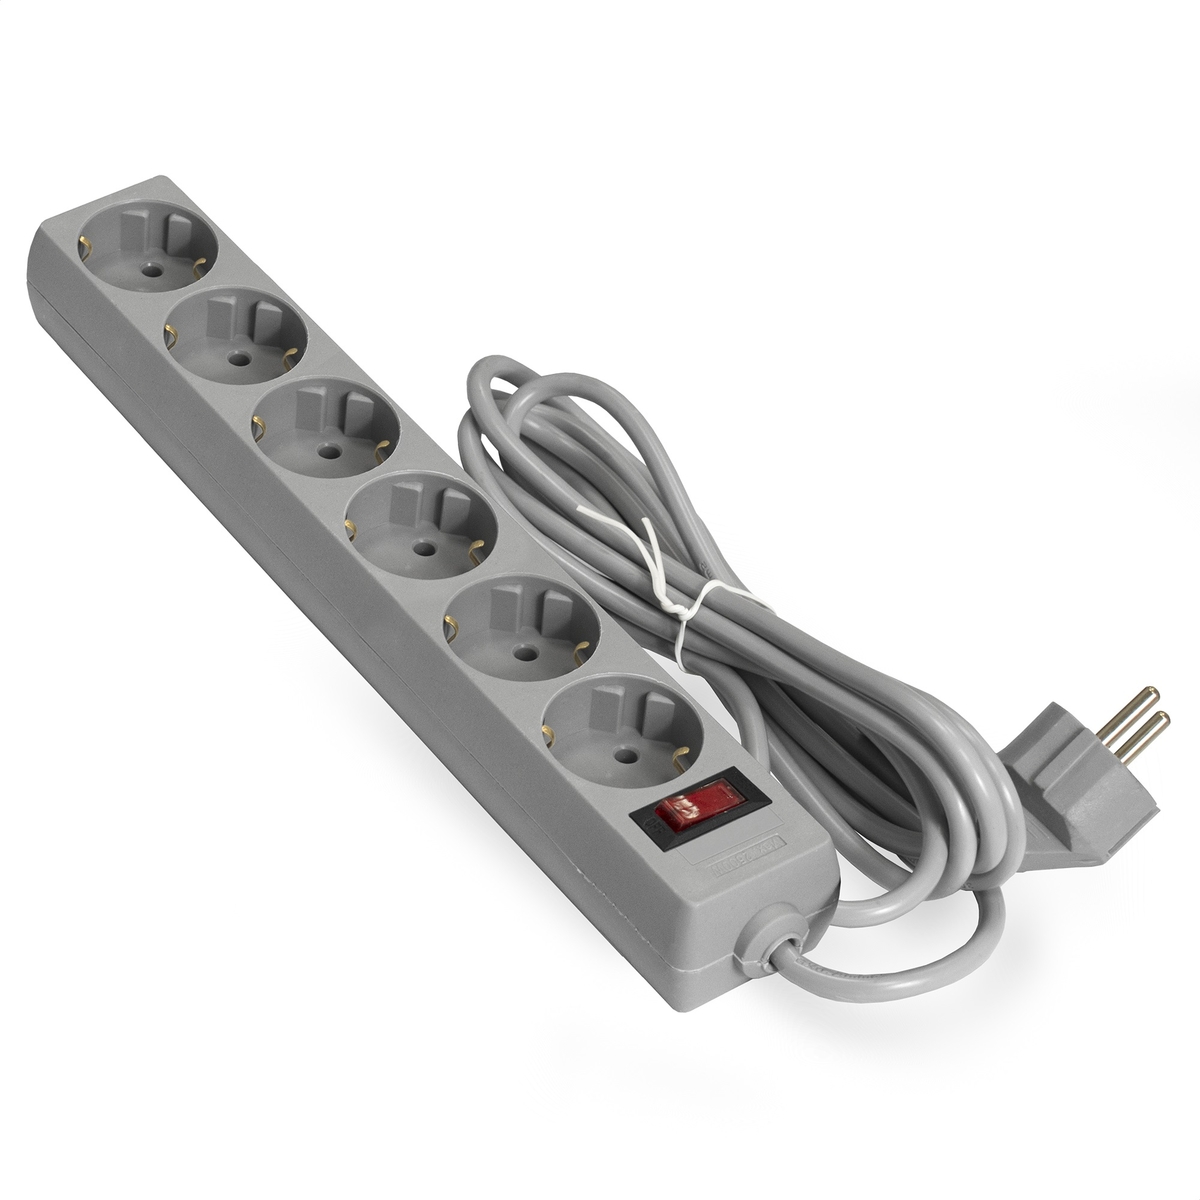 Surge protector ExeGate SP-6-5G